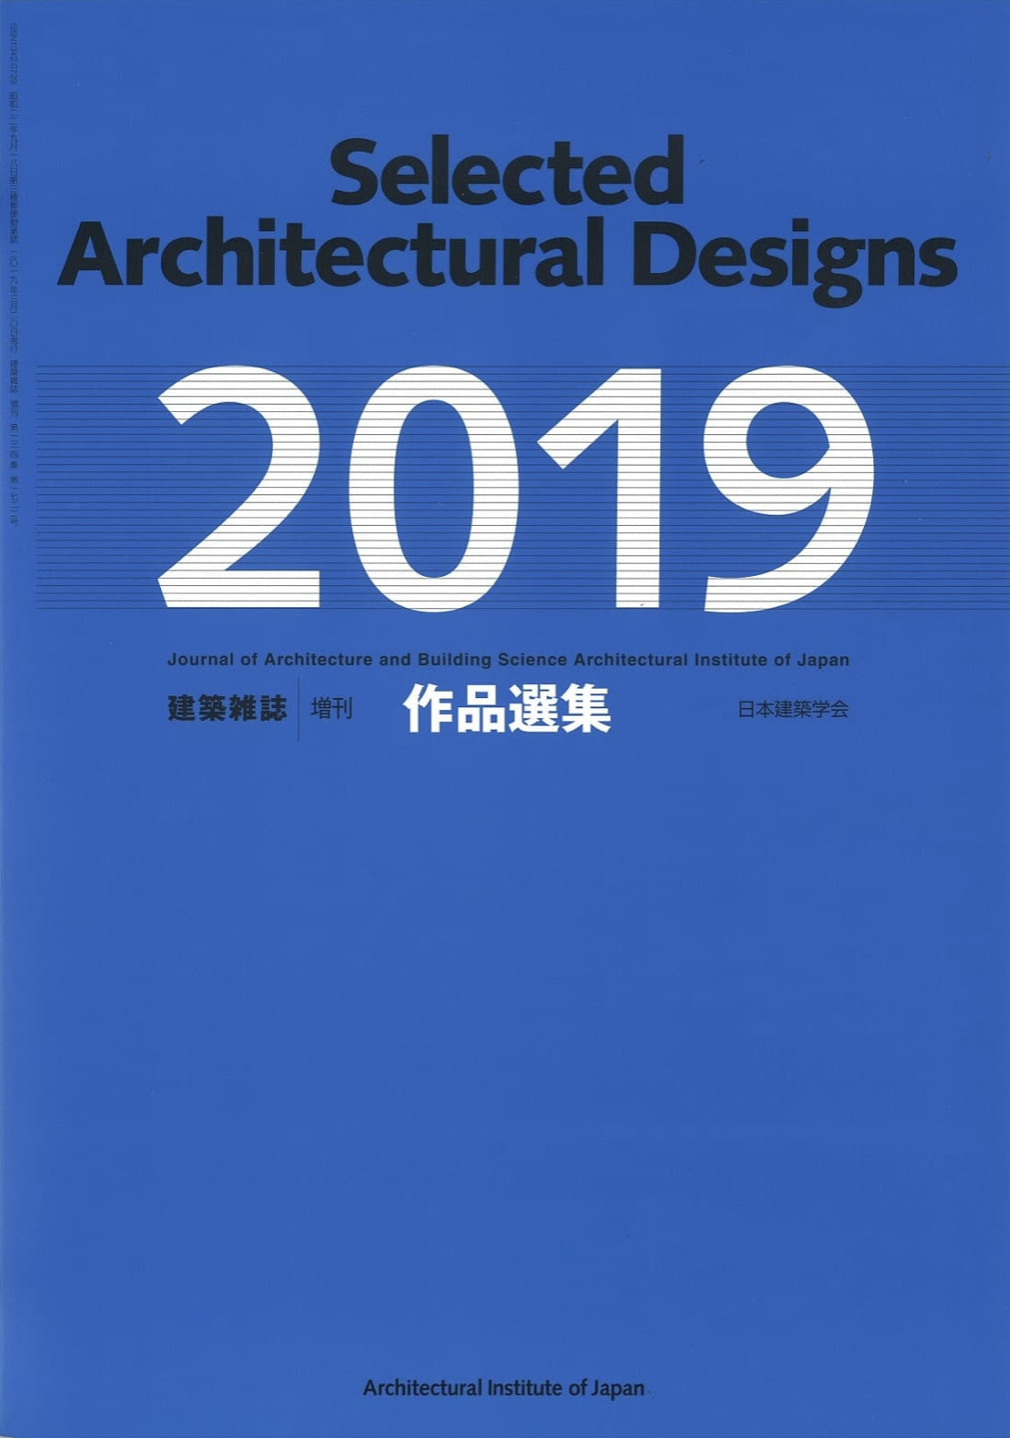 ‘FOUR FUNERAL HOUSES’ was published in the selection of works 2019 sponsored by the Architectural Institute of Japan.